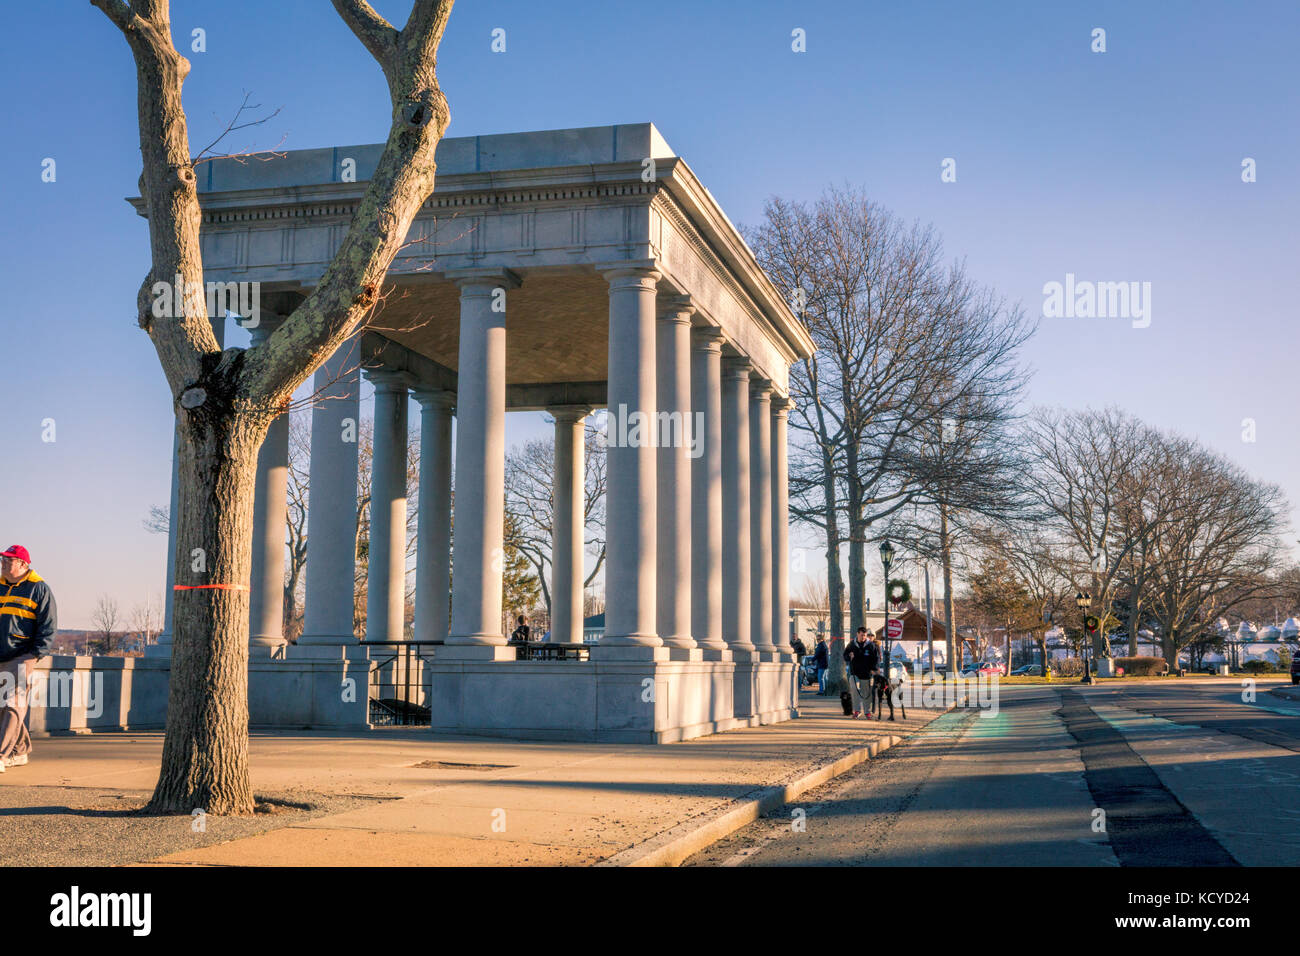 Plymouth Rock in Plymouth Massachusetts is where the Pilgrims landed in 1620. Stock Photo